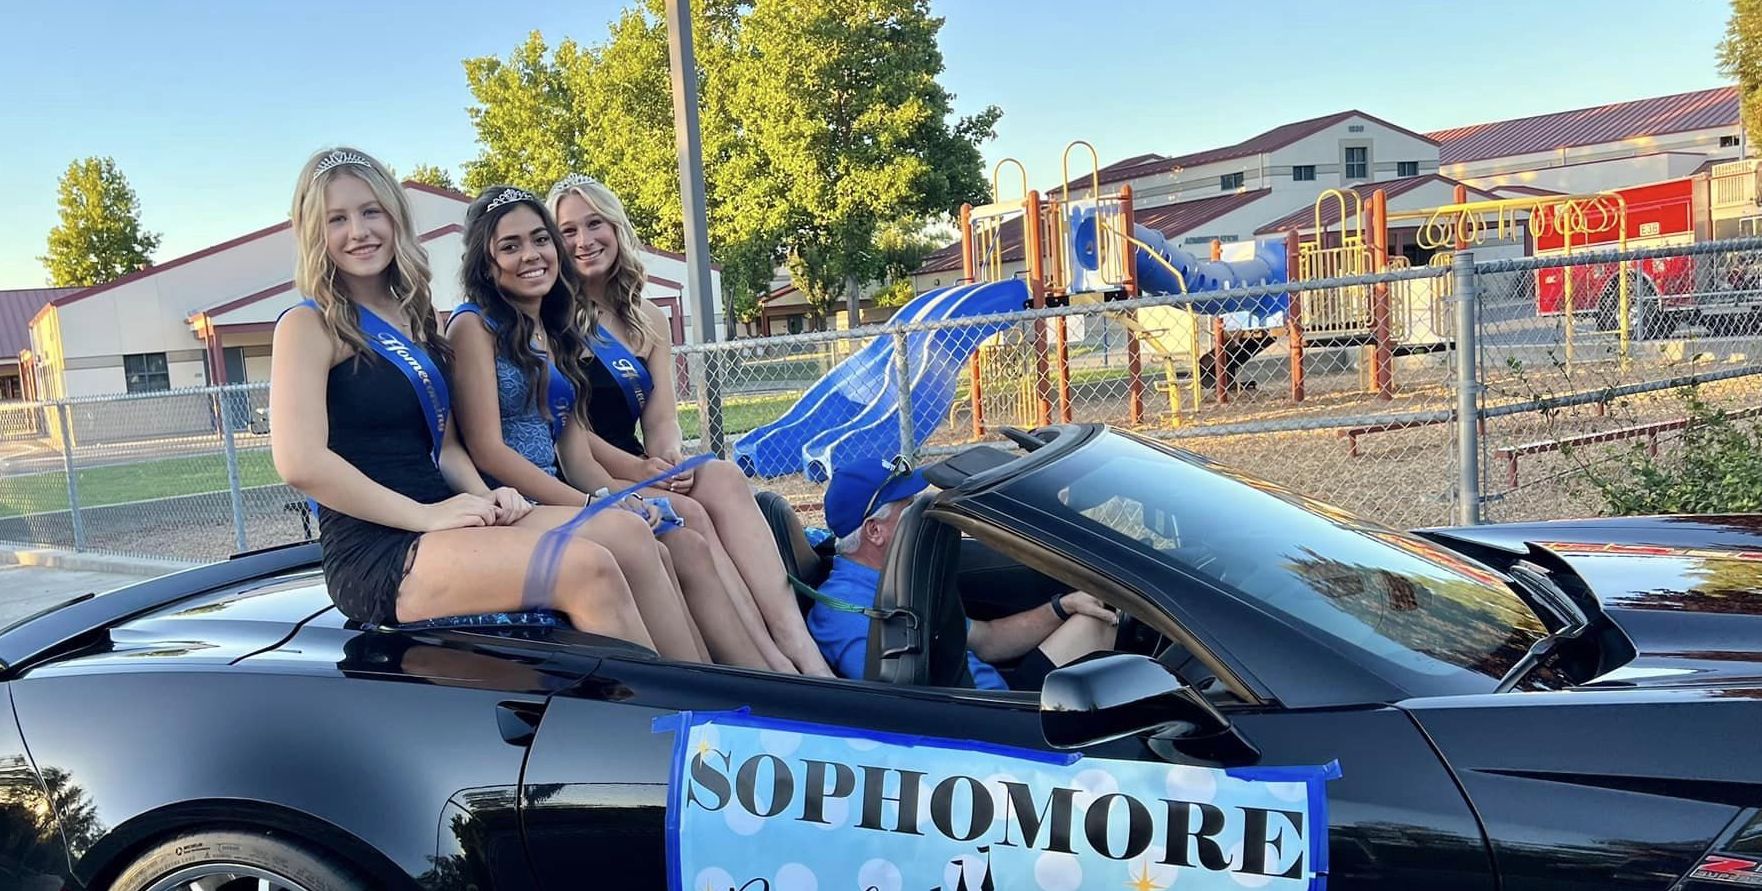 Community celebrates Vista homecoming with annual parade